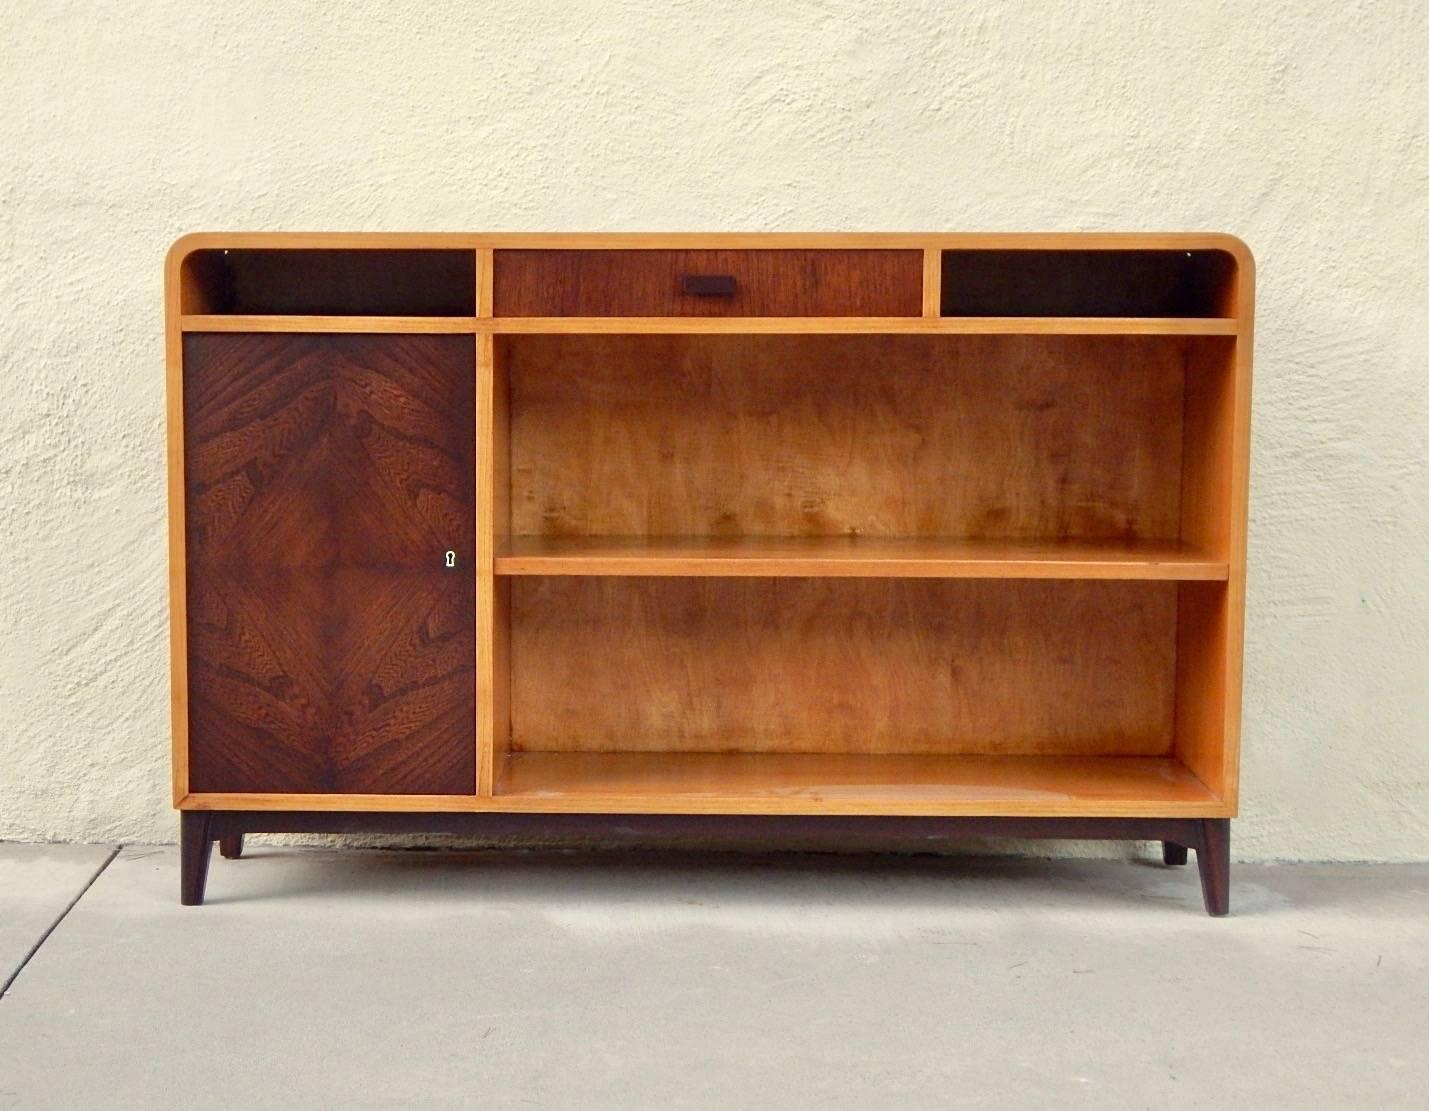 Swedish, 1940s moderne bookcase or sideboard rendered in elmwood. With highly figured bookmatched elmwood doors. One adjustable and removable shelf. Interior also with shelf. Restored by our woodworkers to its original luster.